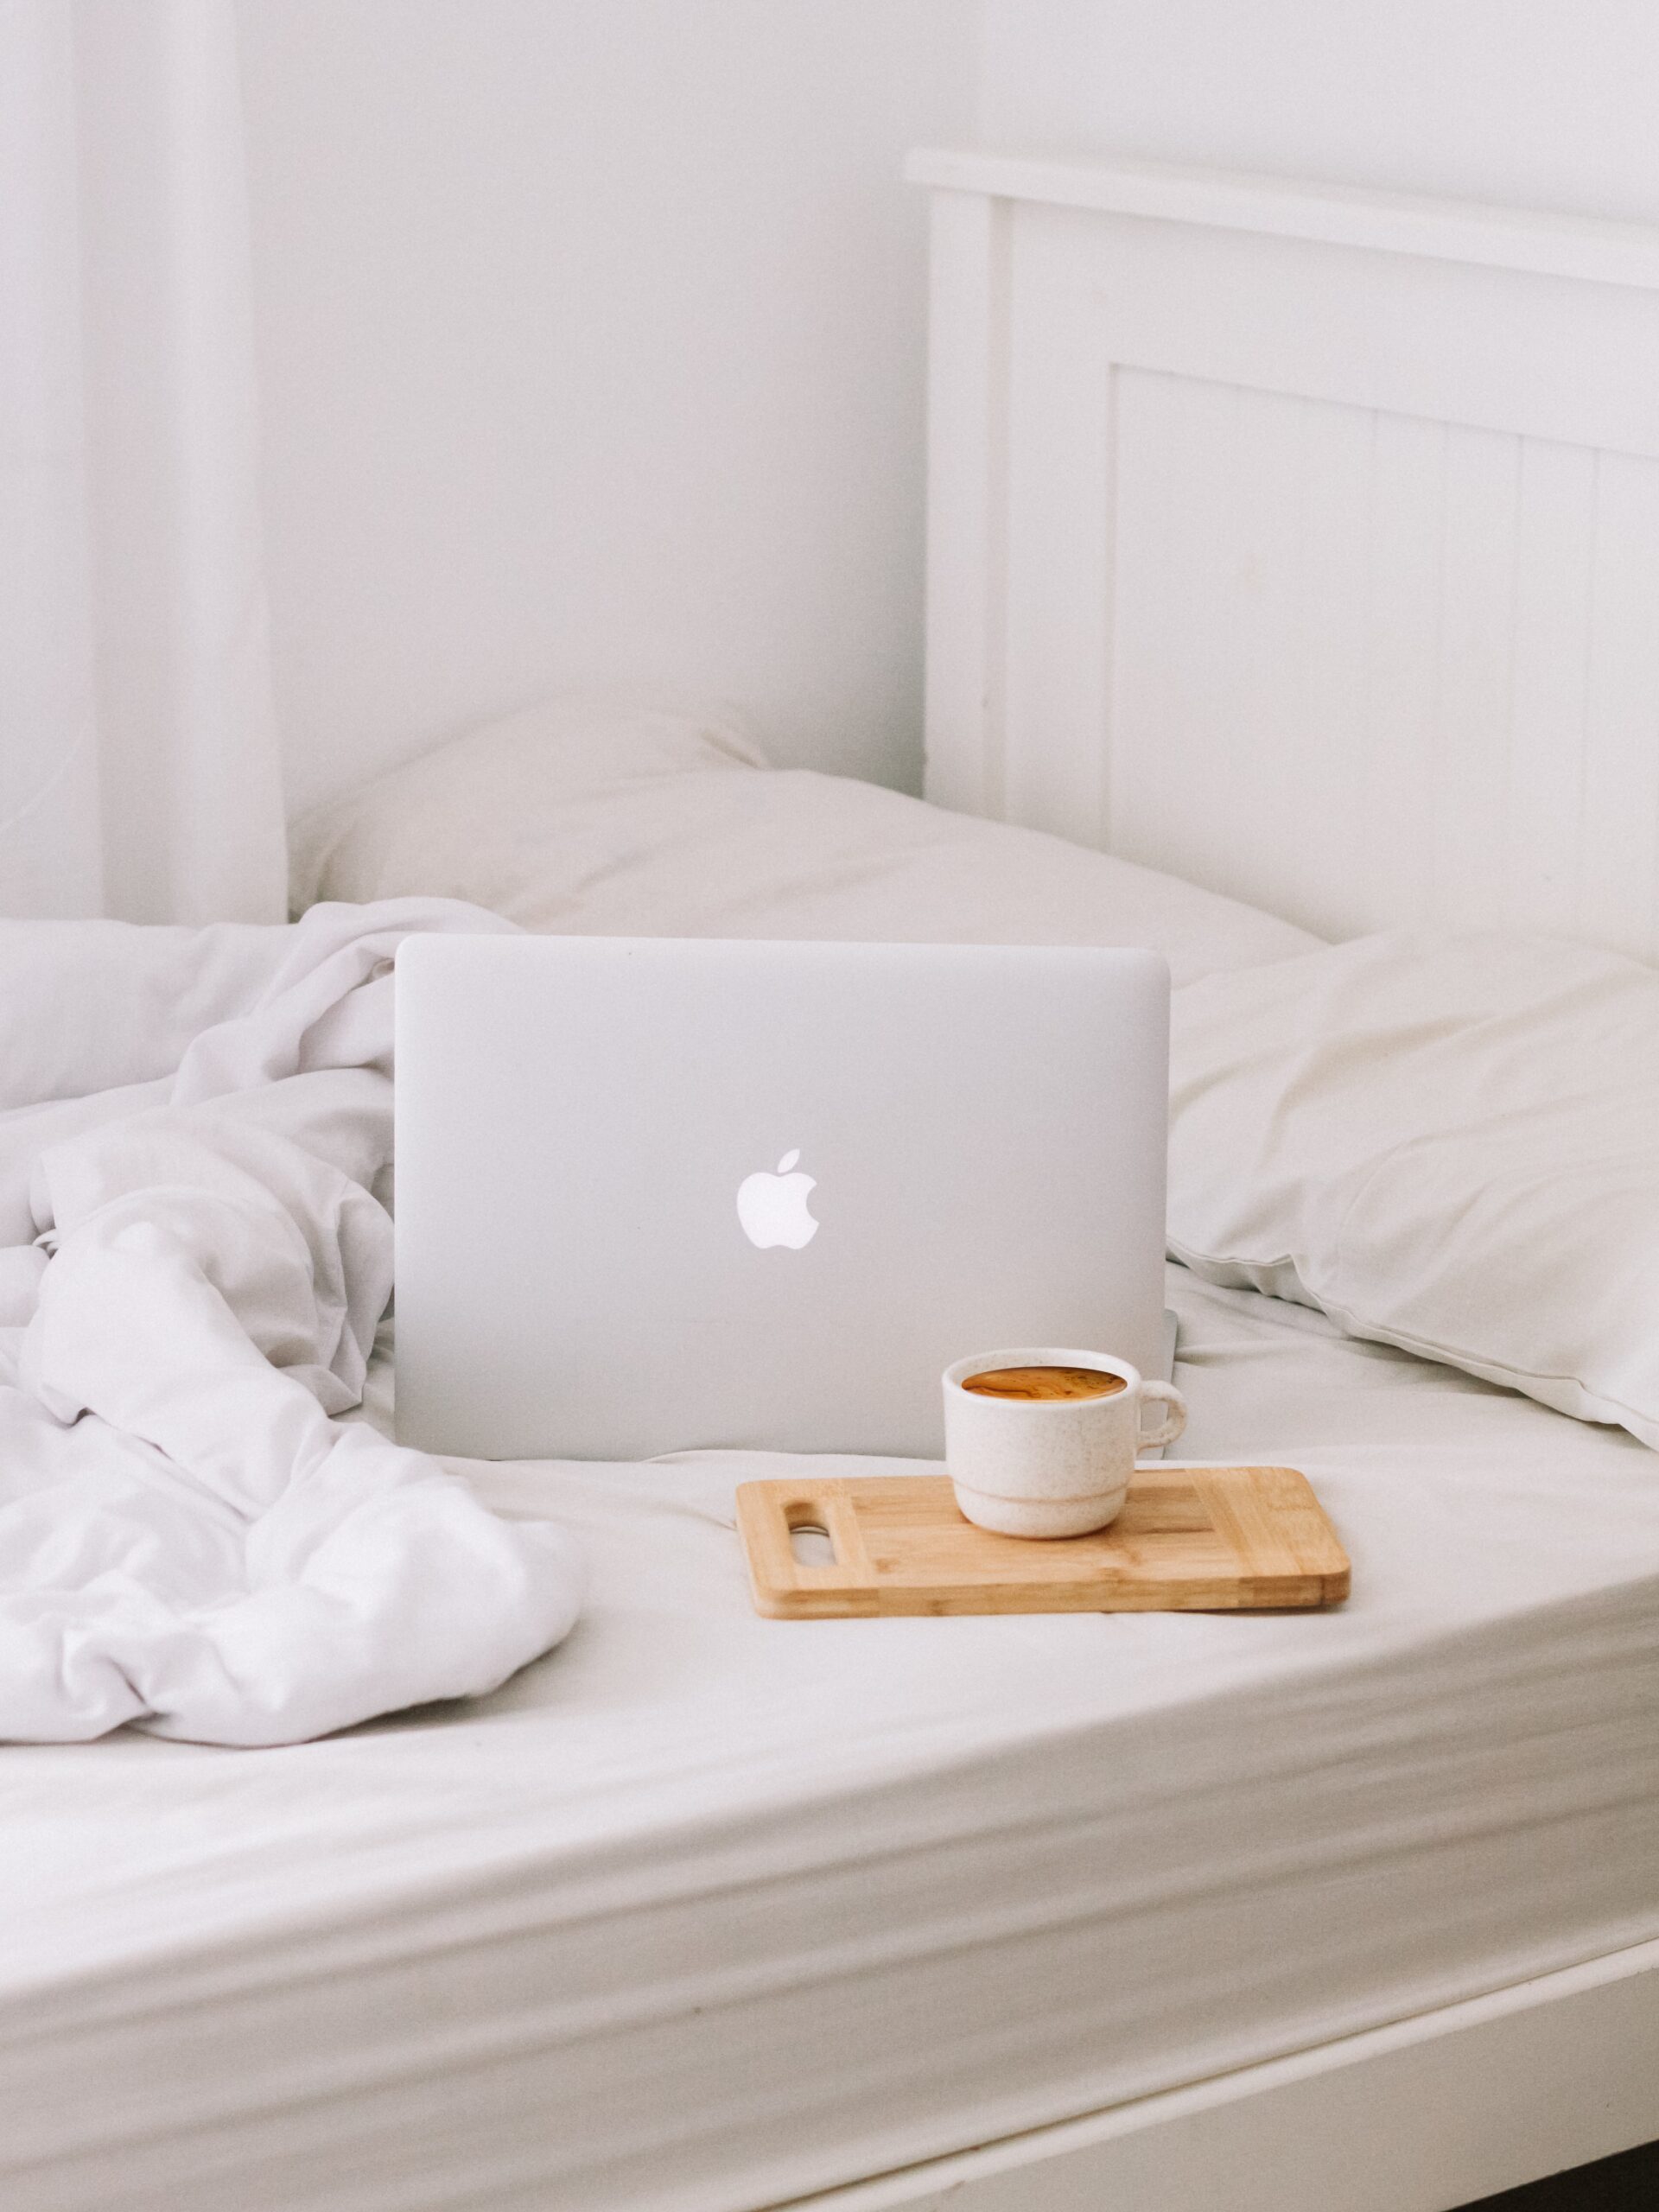 Laptop and coffee on a white bed and white duvet